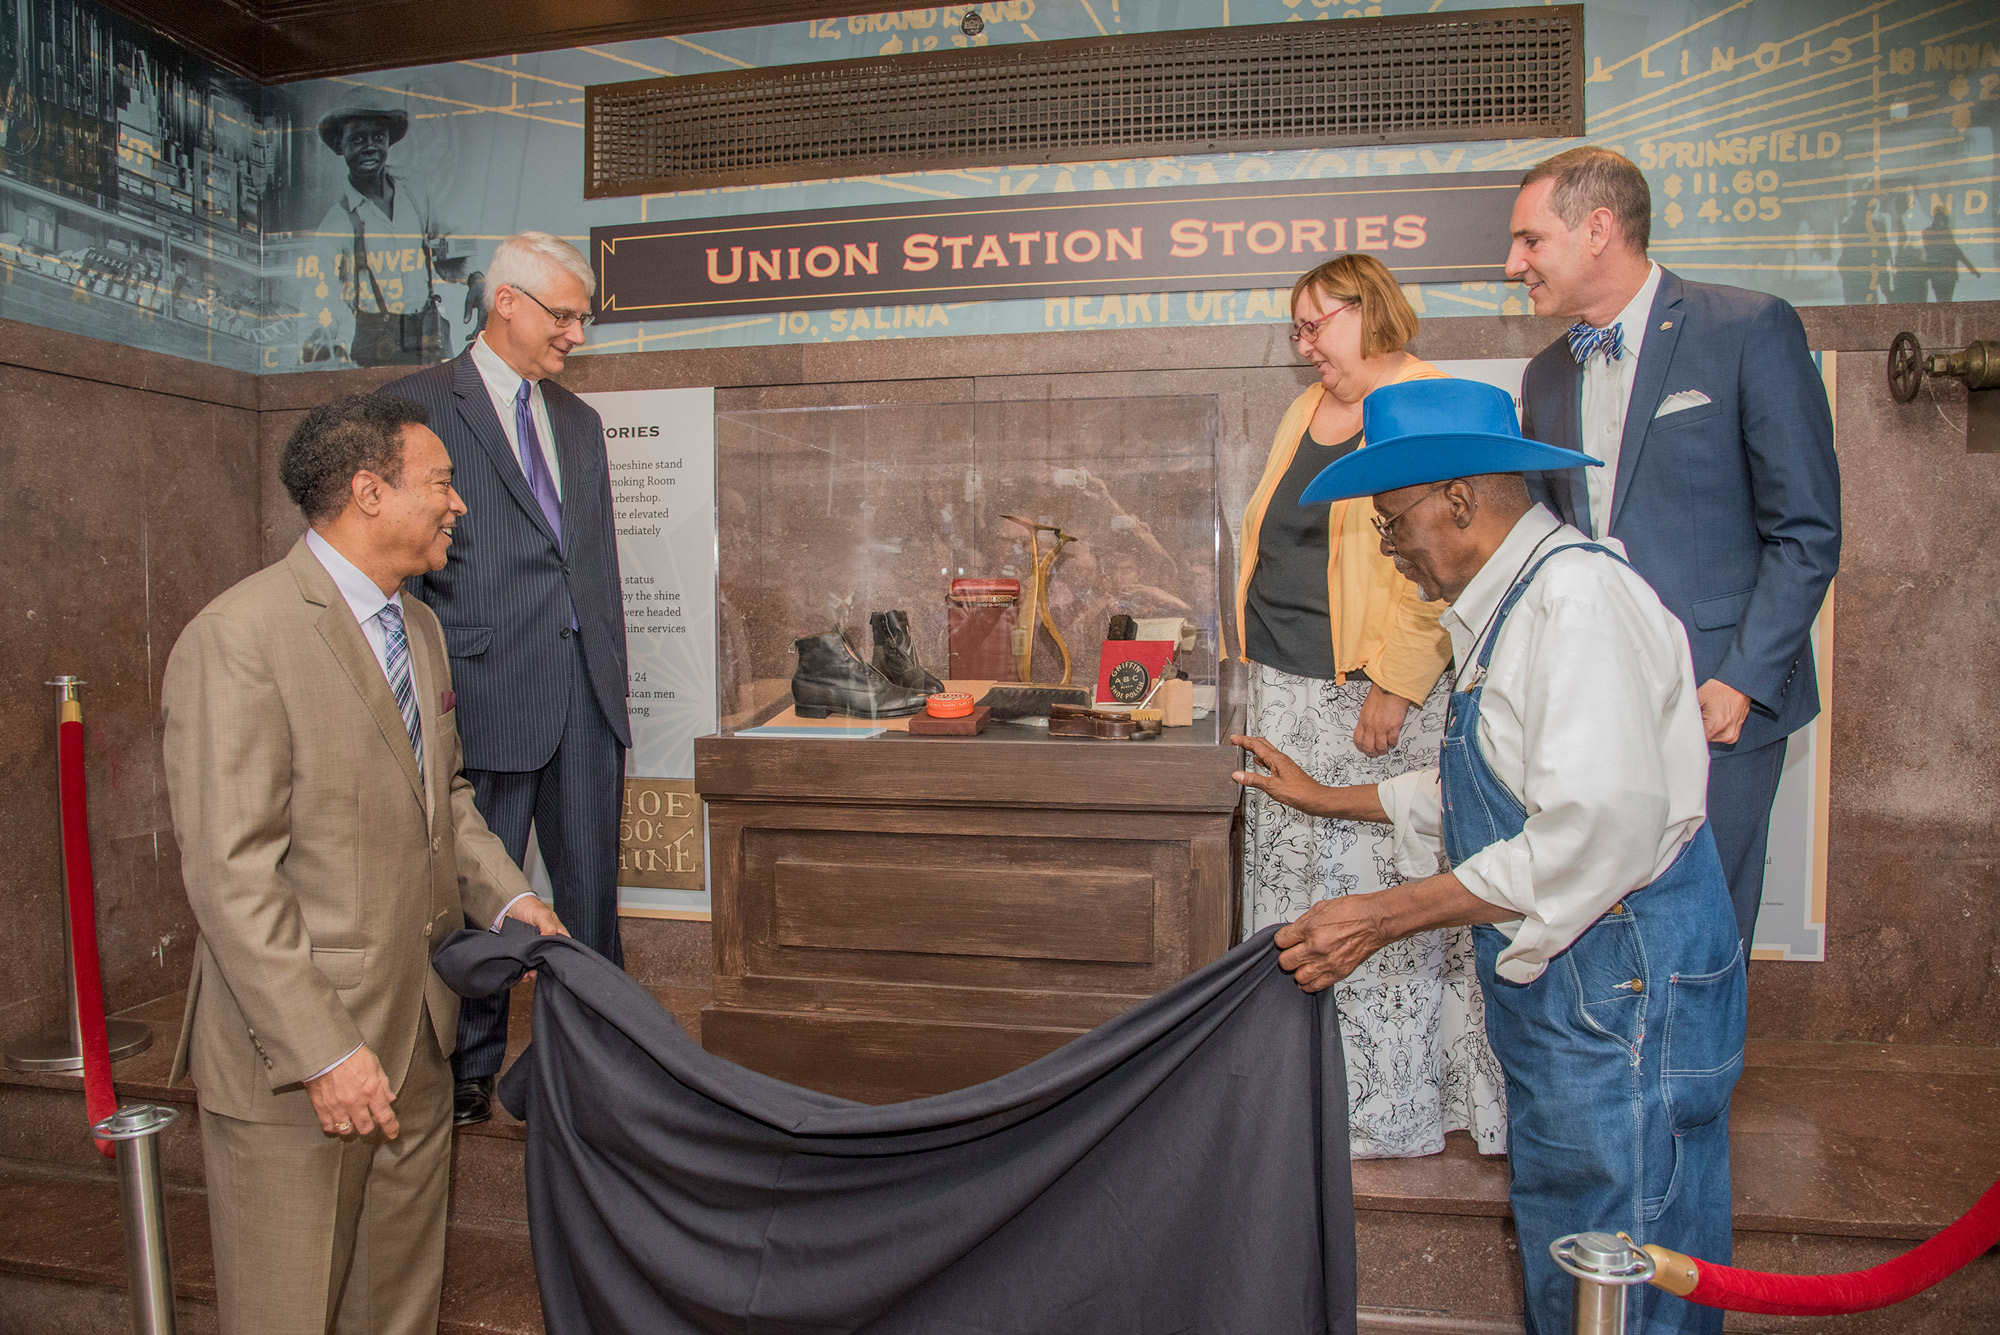 the grand opening of the shoe shiner exhibit at Union Station's Kansas City art gallery